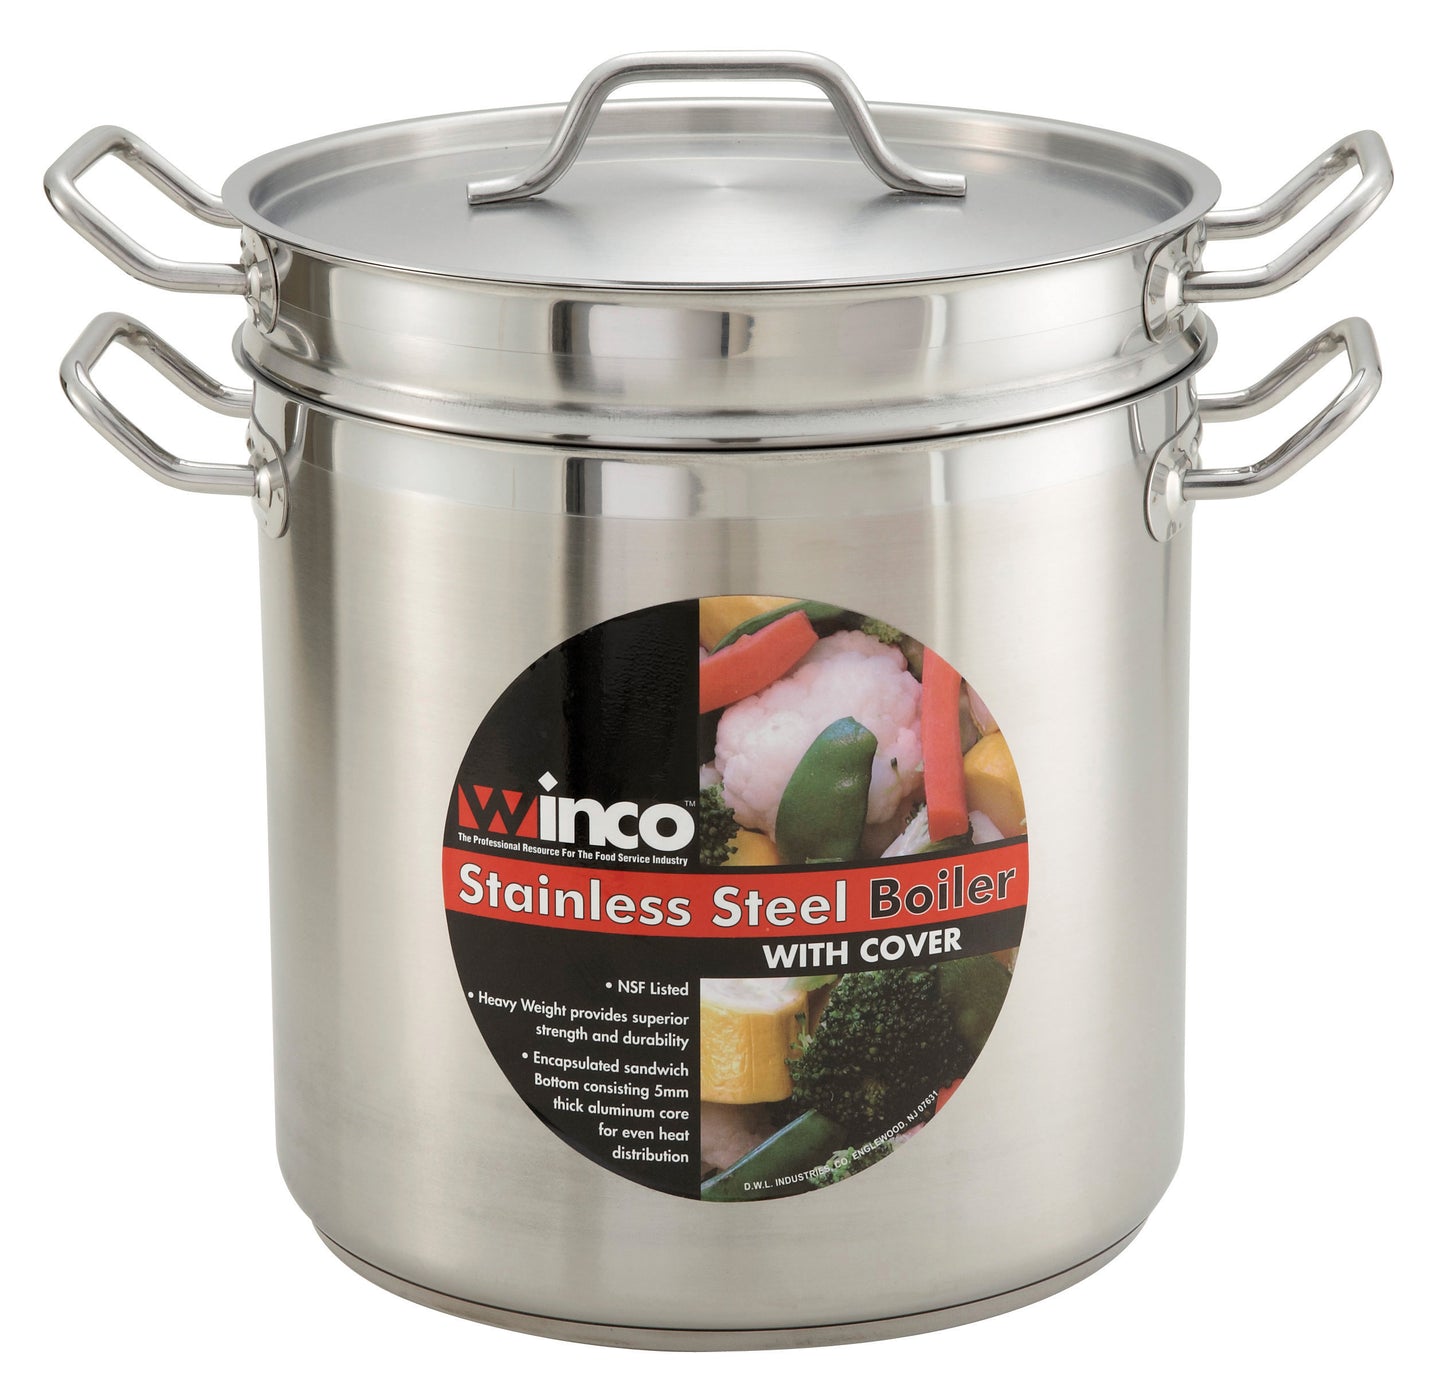 SSDB-8 - Stainless Steel Double Boiler with Cover - 8 Quart